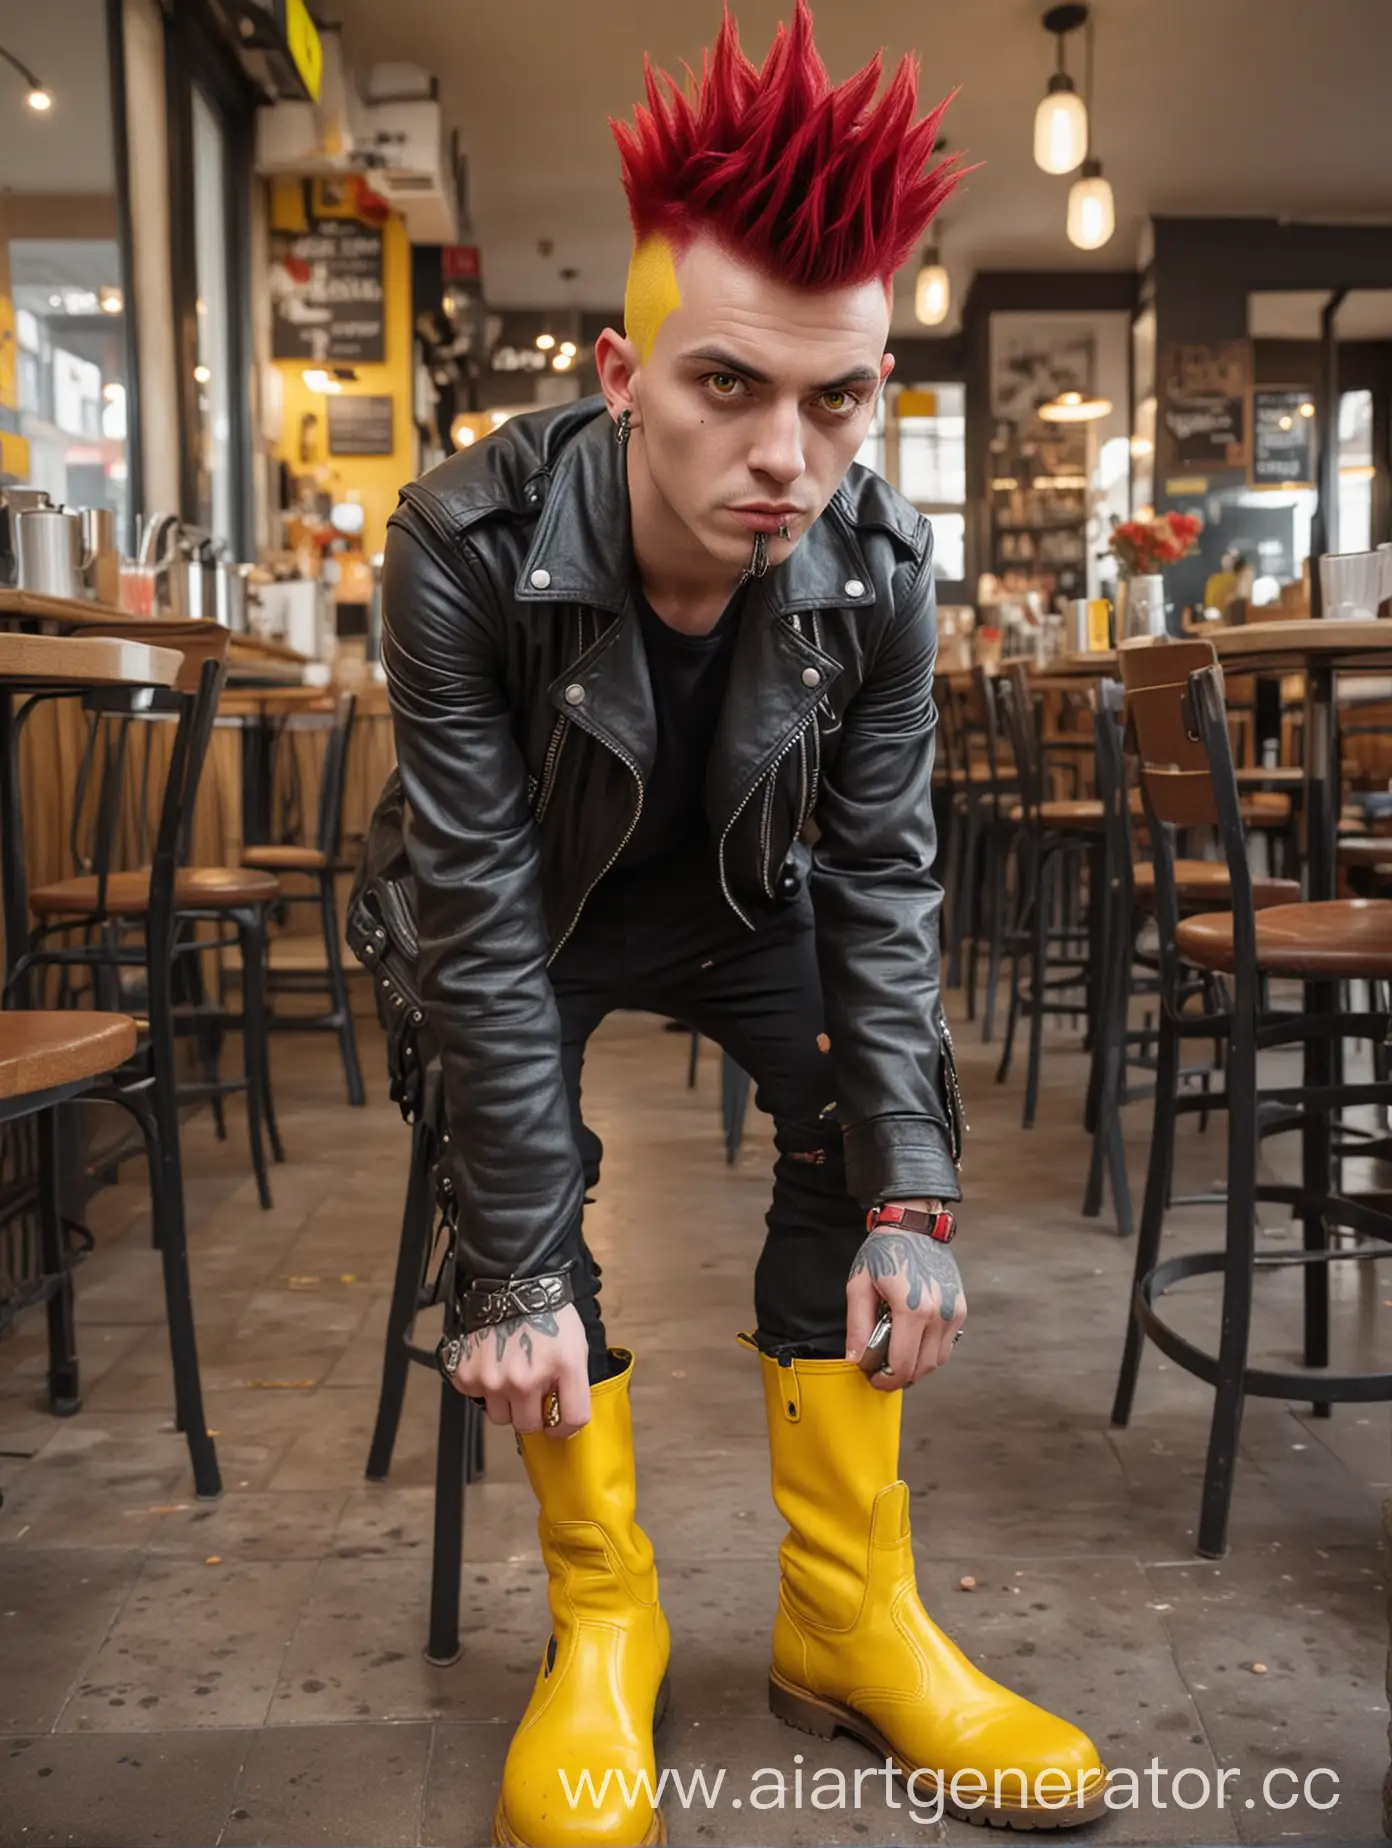 Colorful-Cafe-Cleaner-Short-Figure-with-Crimson-Mohawk-and-Piercings